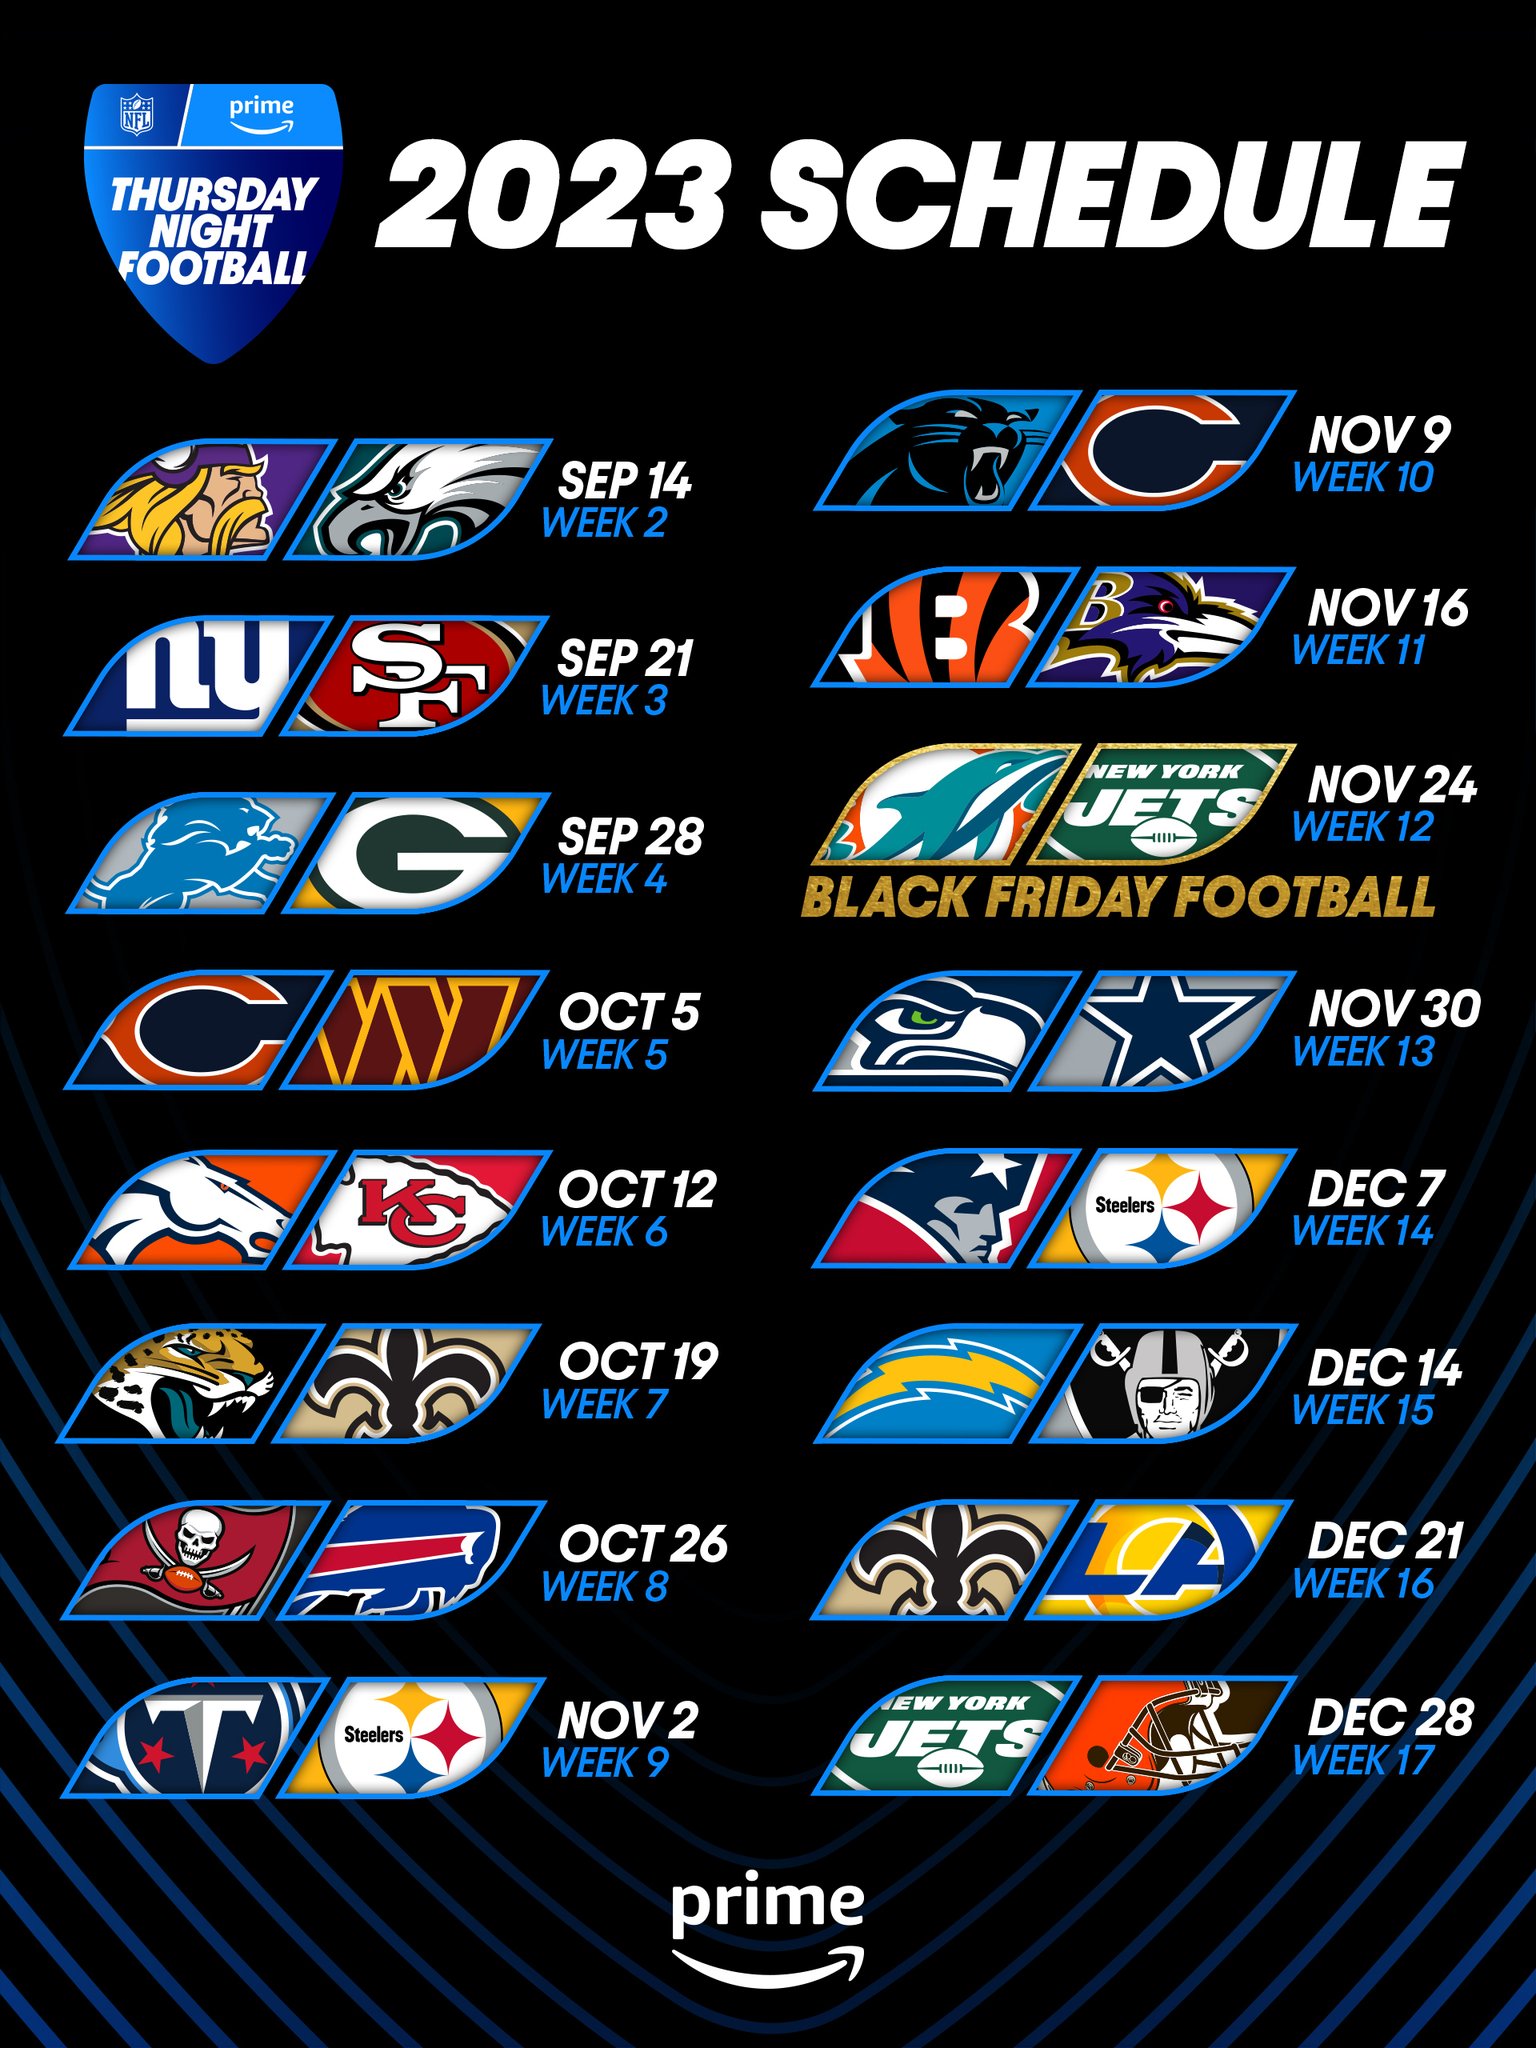 When does the 2023 NFL season start? Here's the Week 1 game schedule